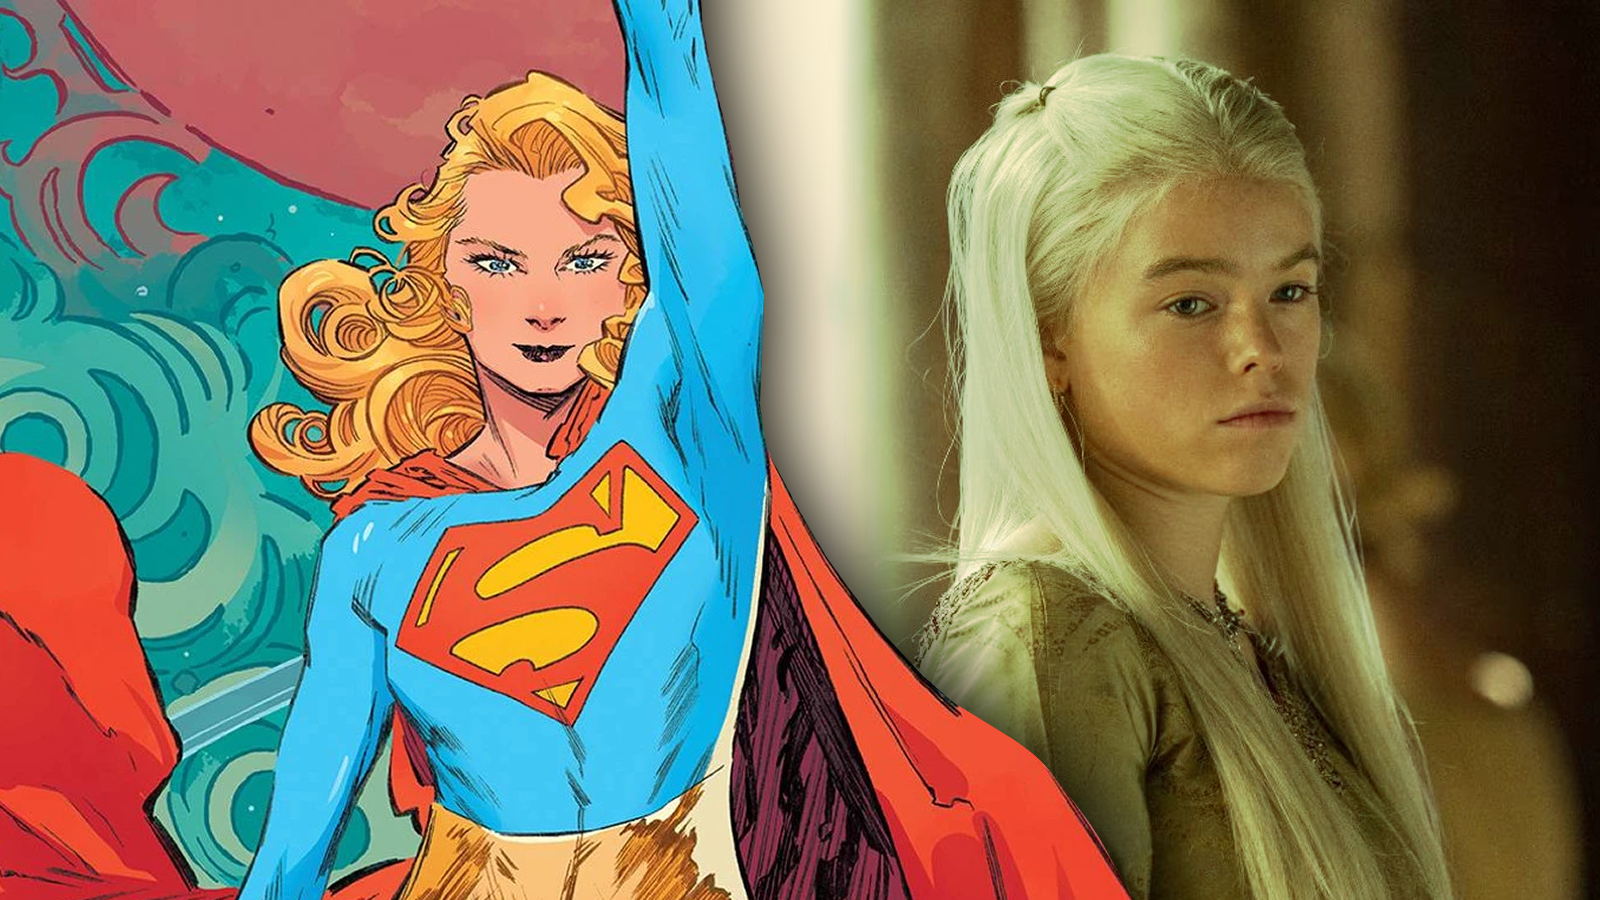 A custom header combining Supergirl: Woman of Tomorrow artwork with a still of Milly Alcock in House of the Dragon